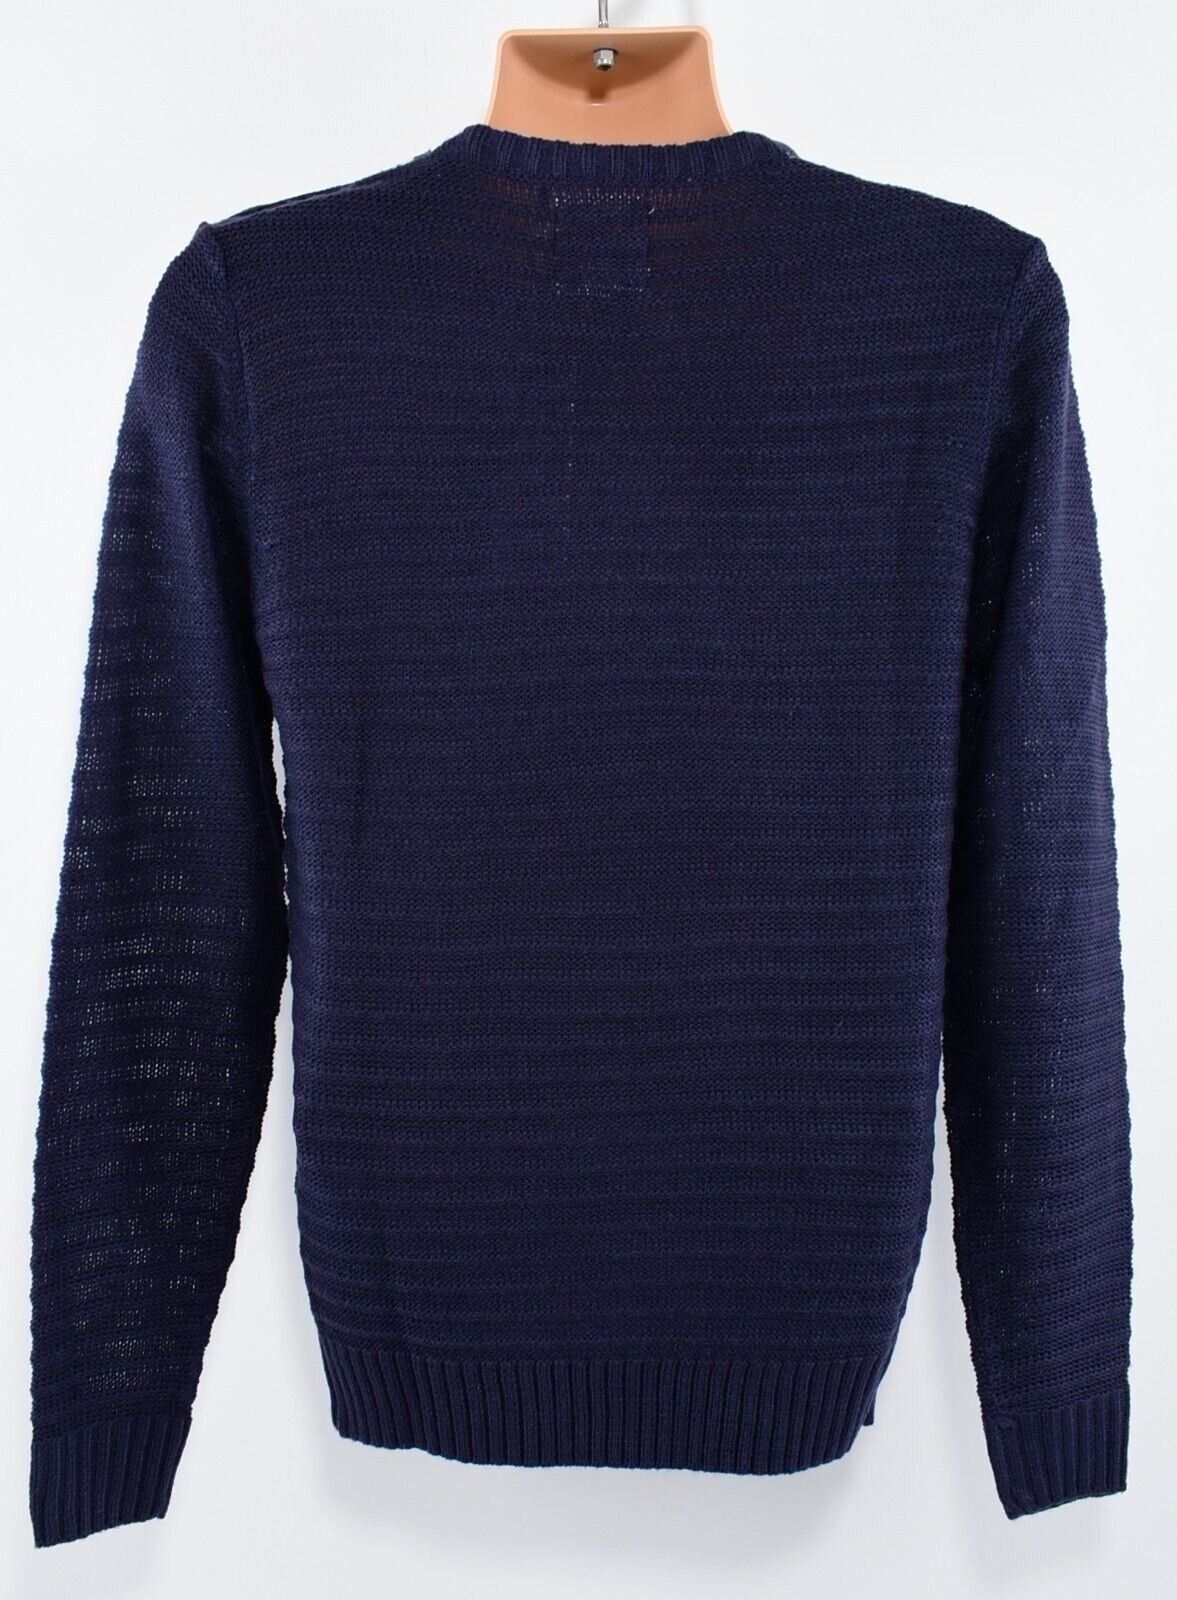 LEE COOPER Men's Knitted Jumper, Navy Blue, size SMALL